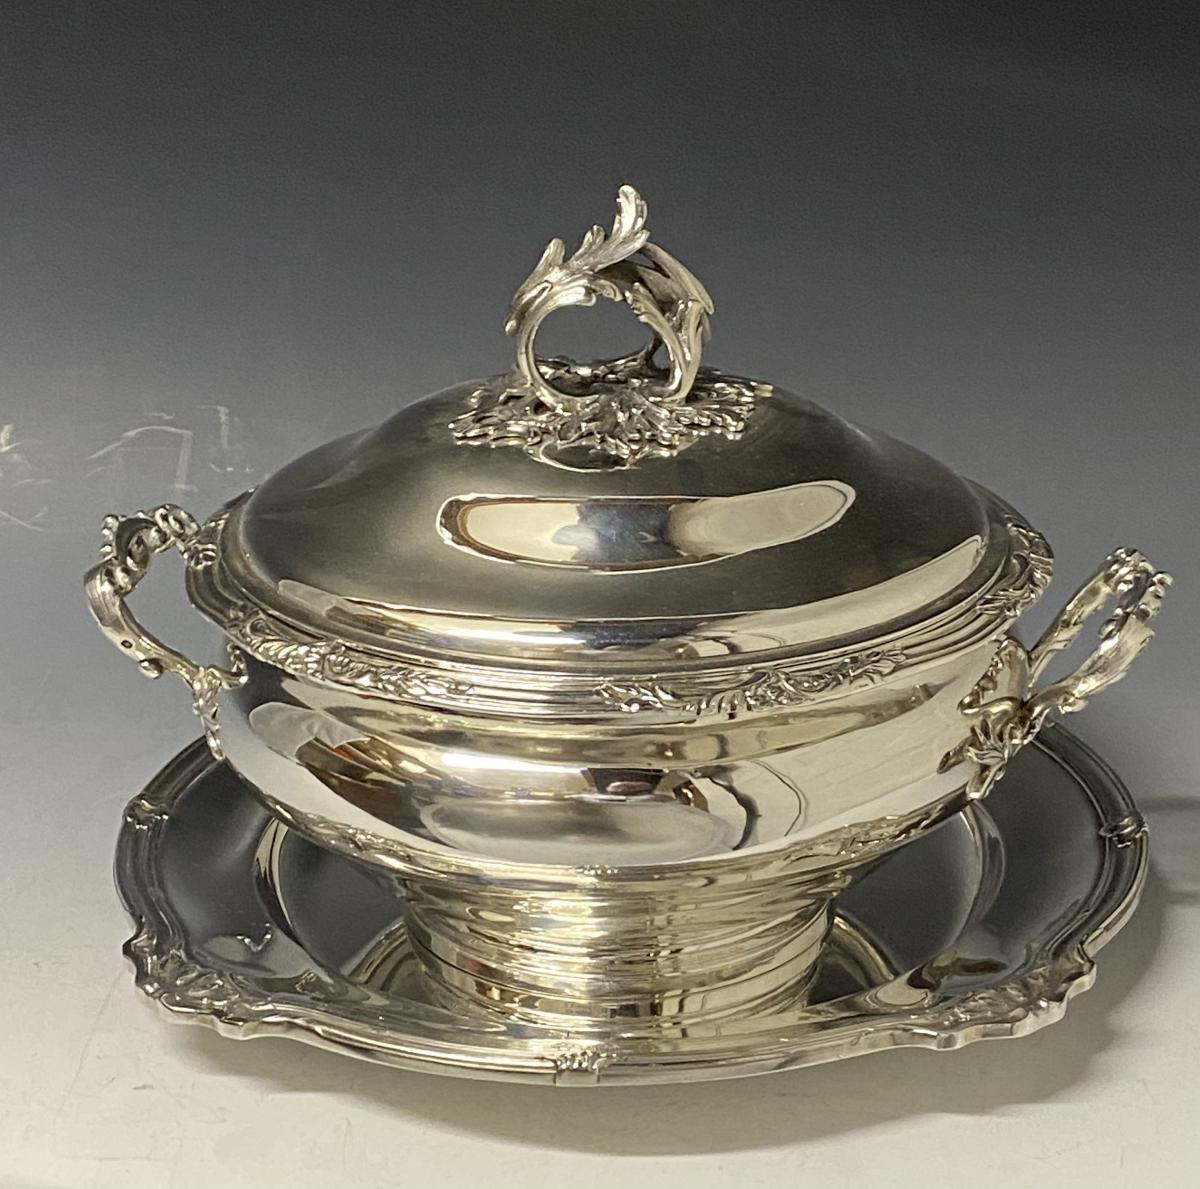 Maharajah of Baroda French silver tureen Jean Baptiste Canaux and Paul Canaux